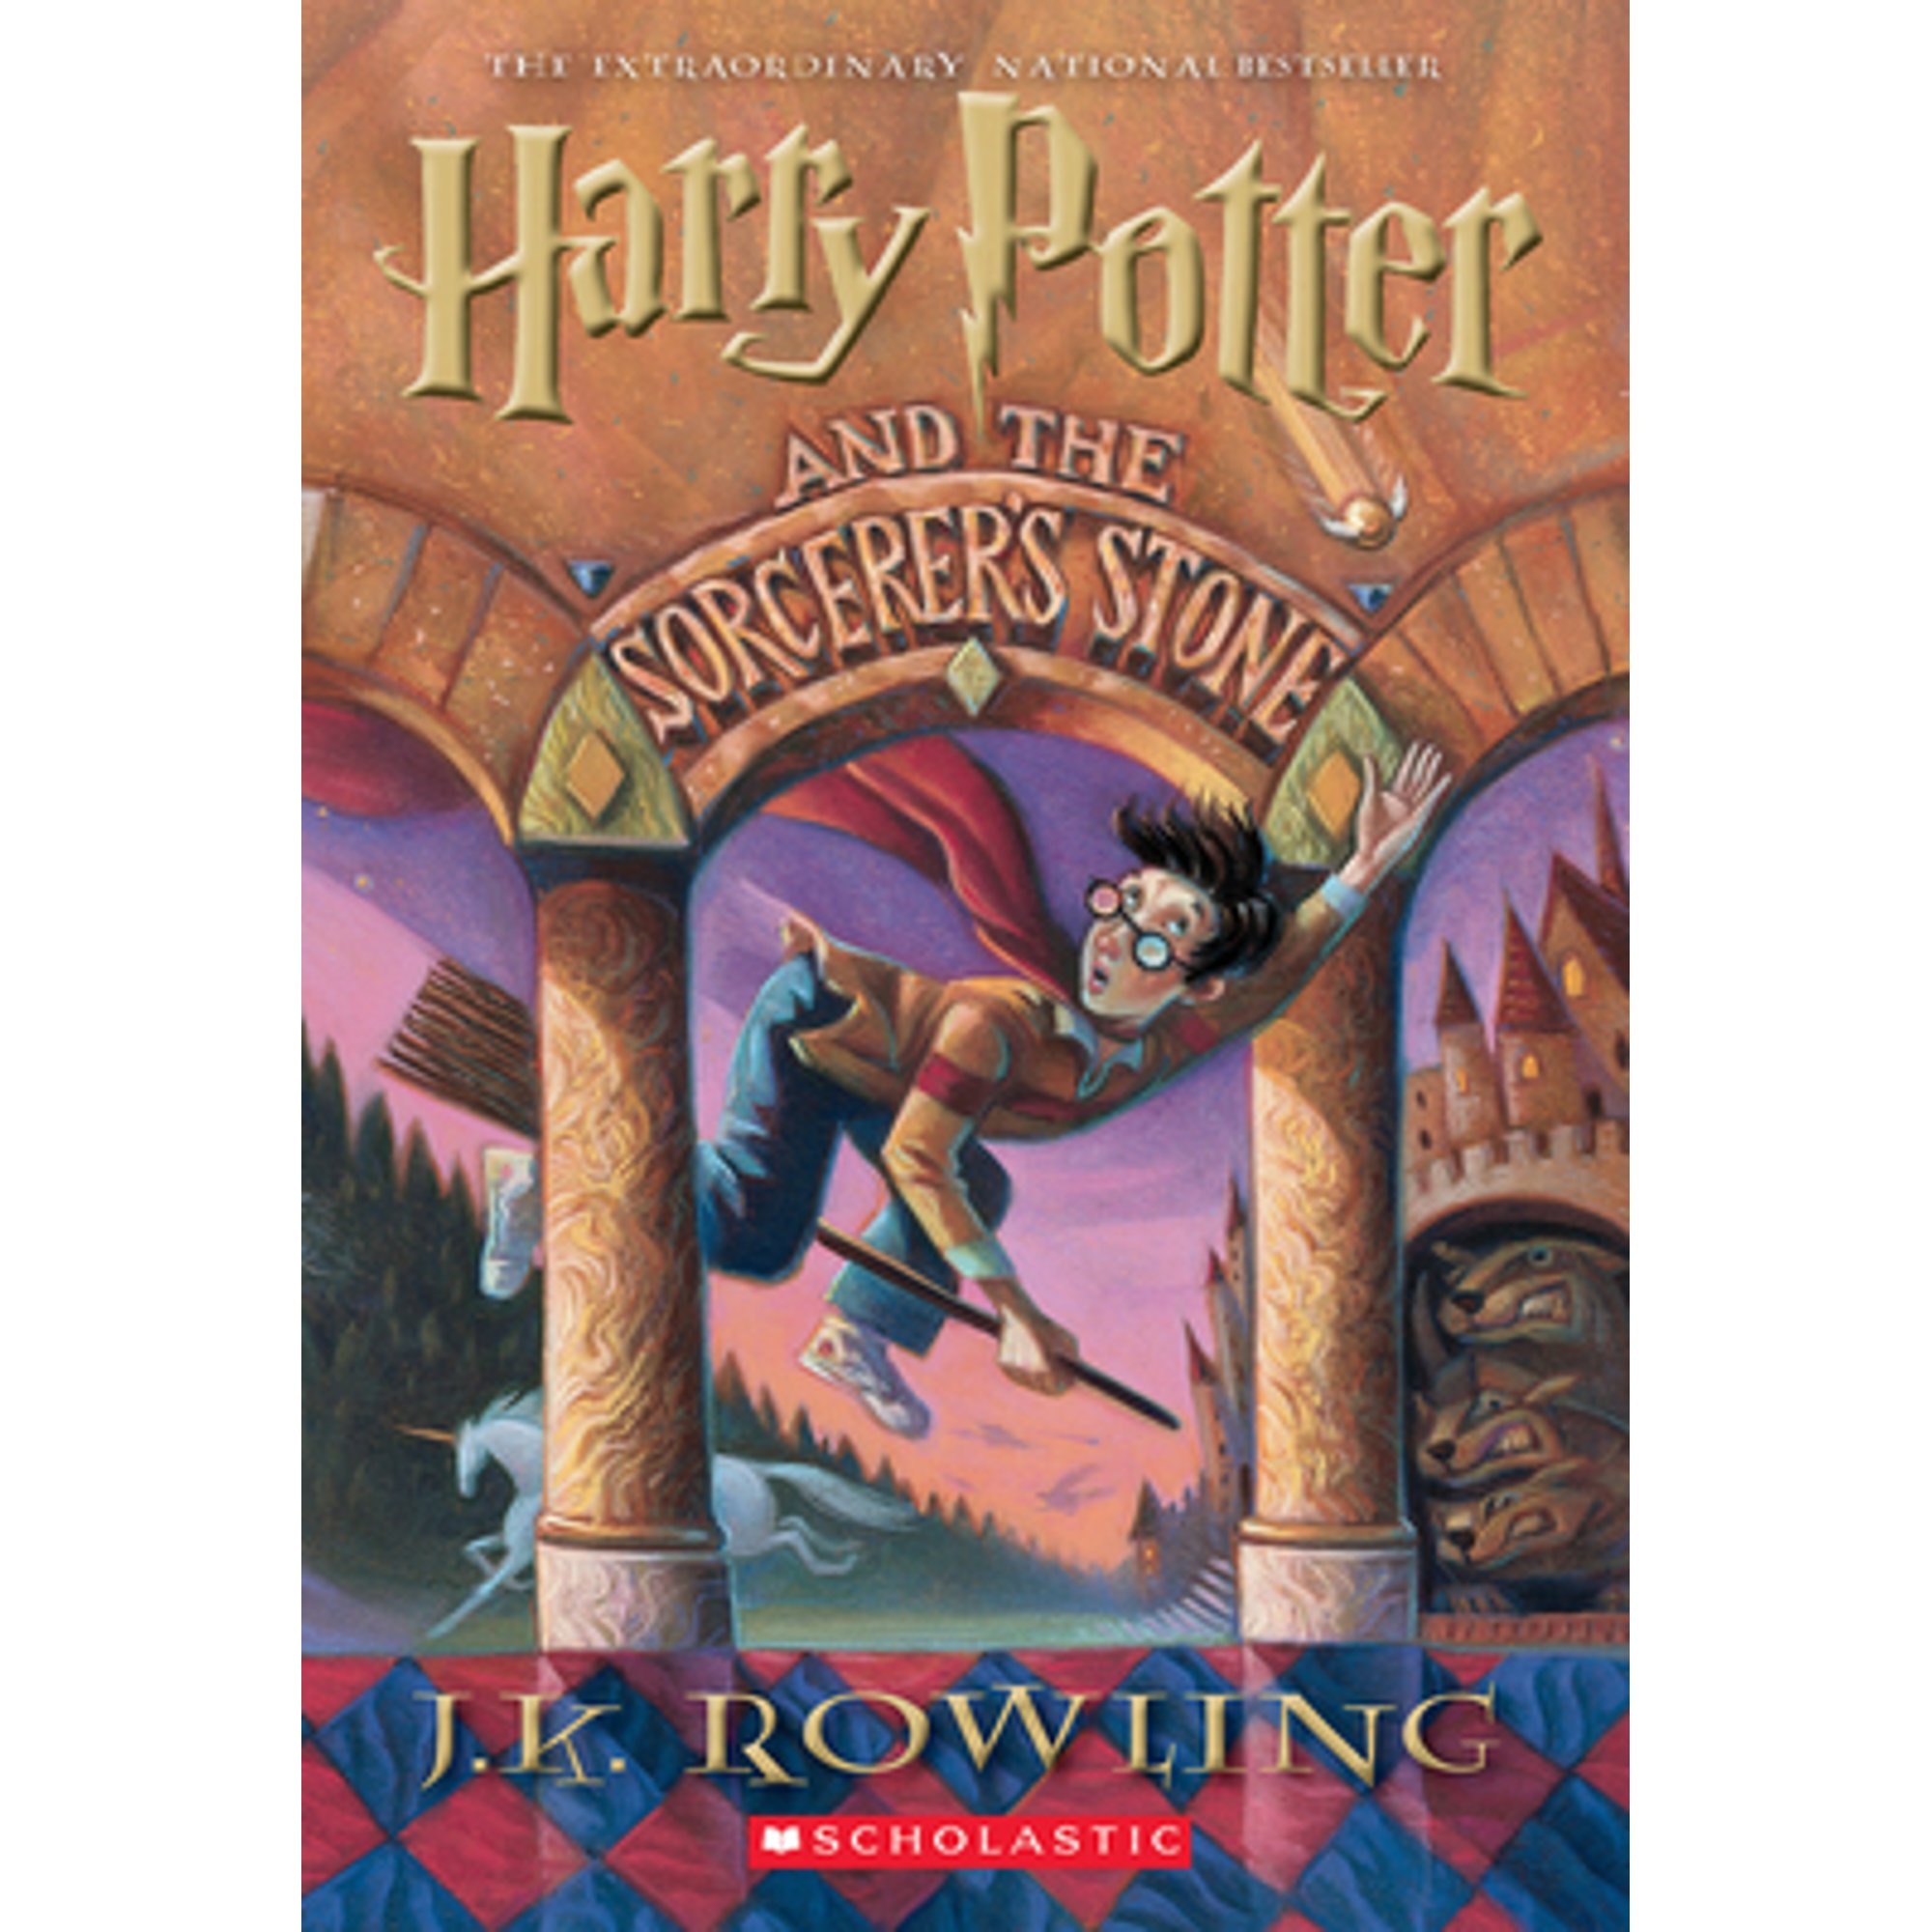 Harry Potter: Harry Potter and the Sorcerer's Stone (Series #01) (Paperback) - image 1 of 1